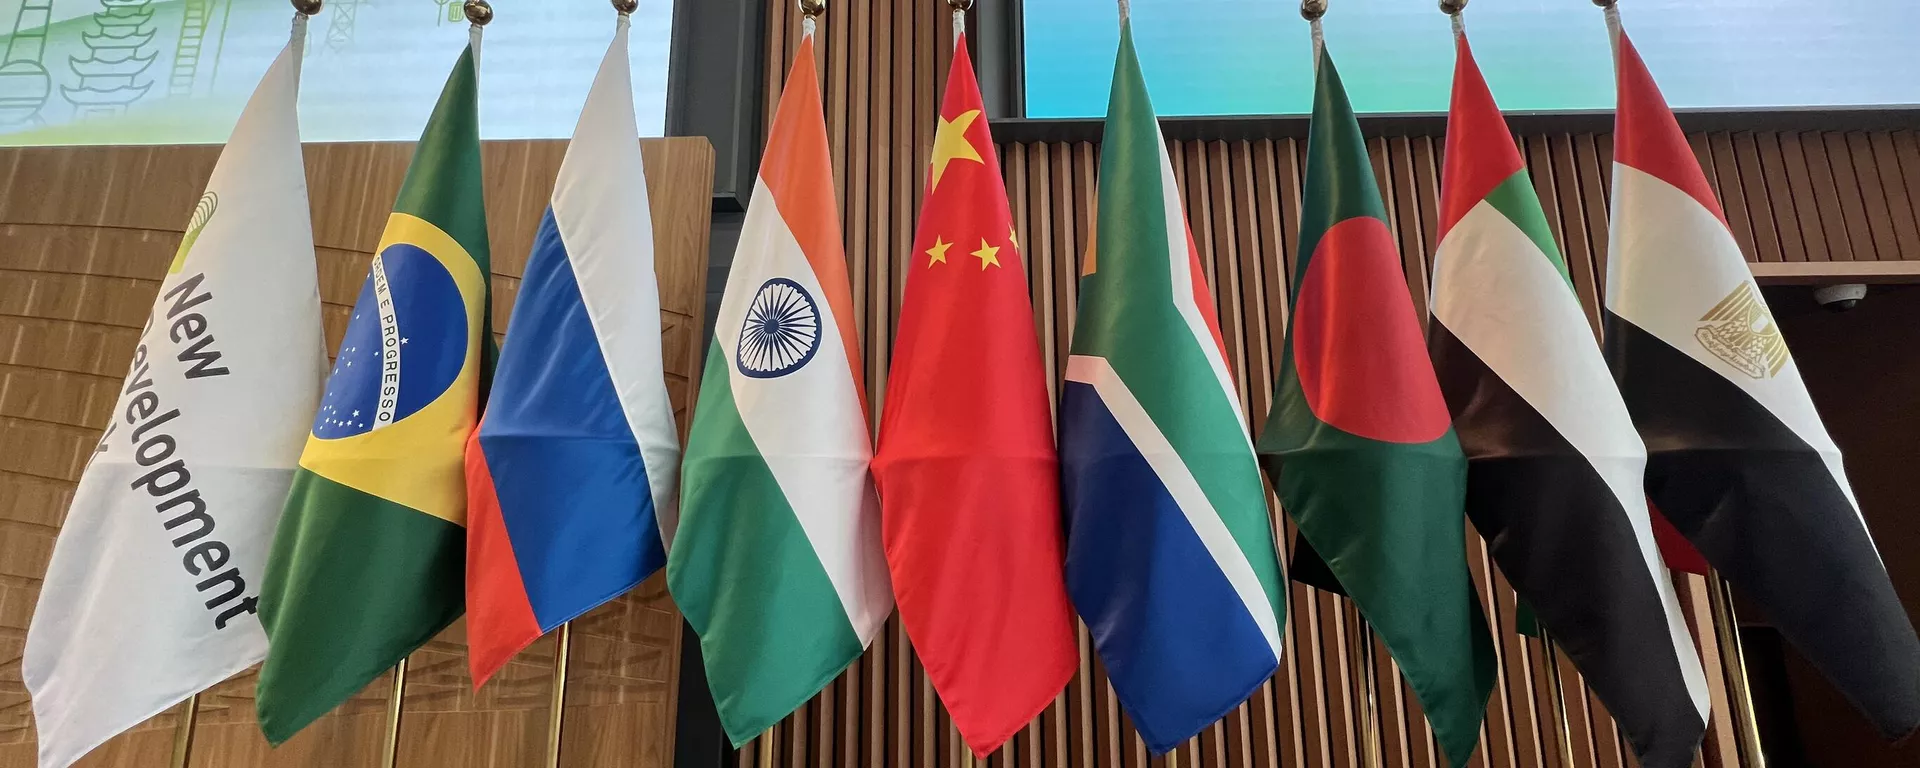 Flags are seen displayed at the opening ceremony of the New Development Bank Eighth Annual Meeting in Shanghai on May 30, 2023 - Sputnik International, 1920, 10.06.2023